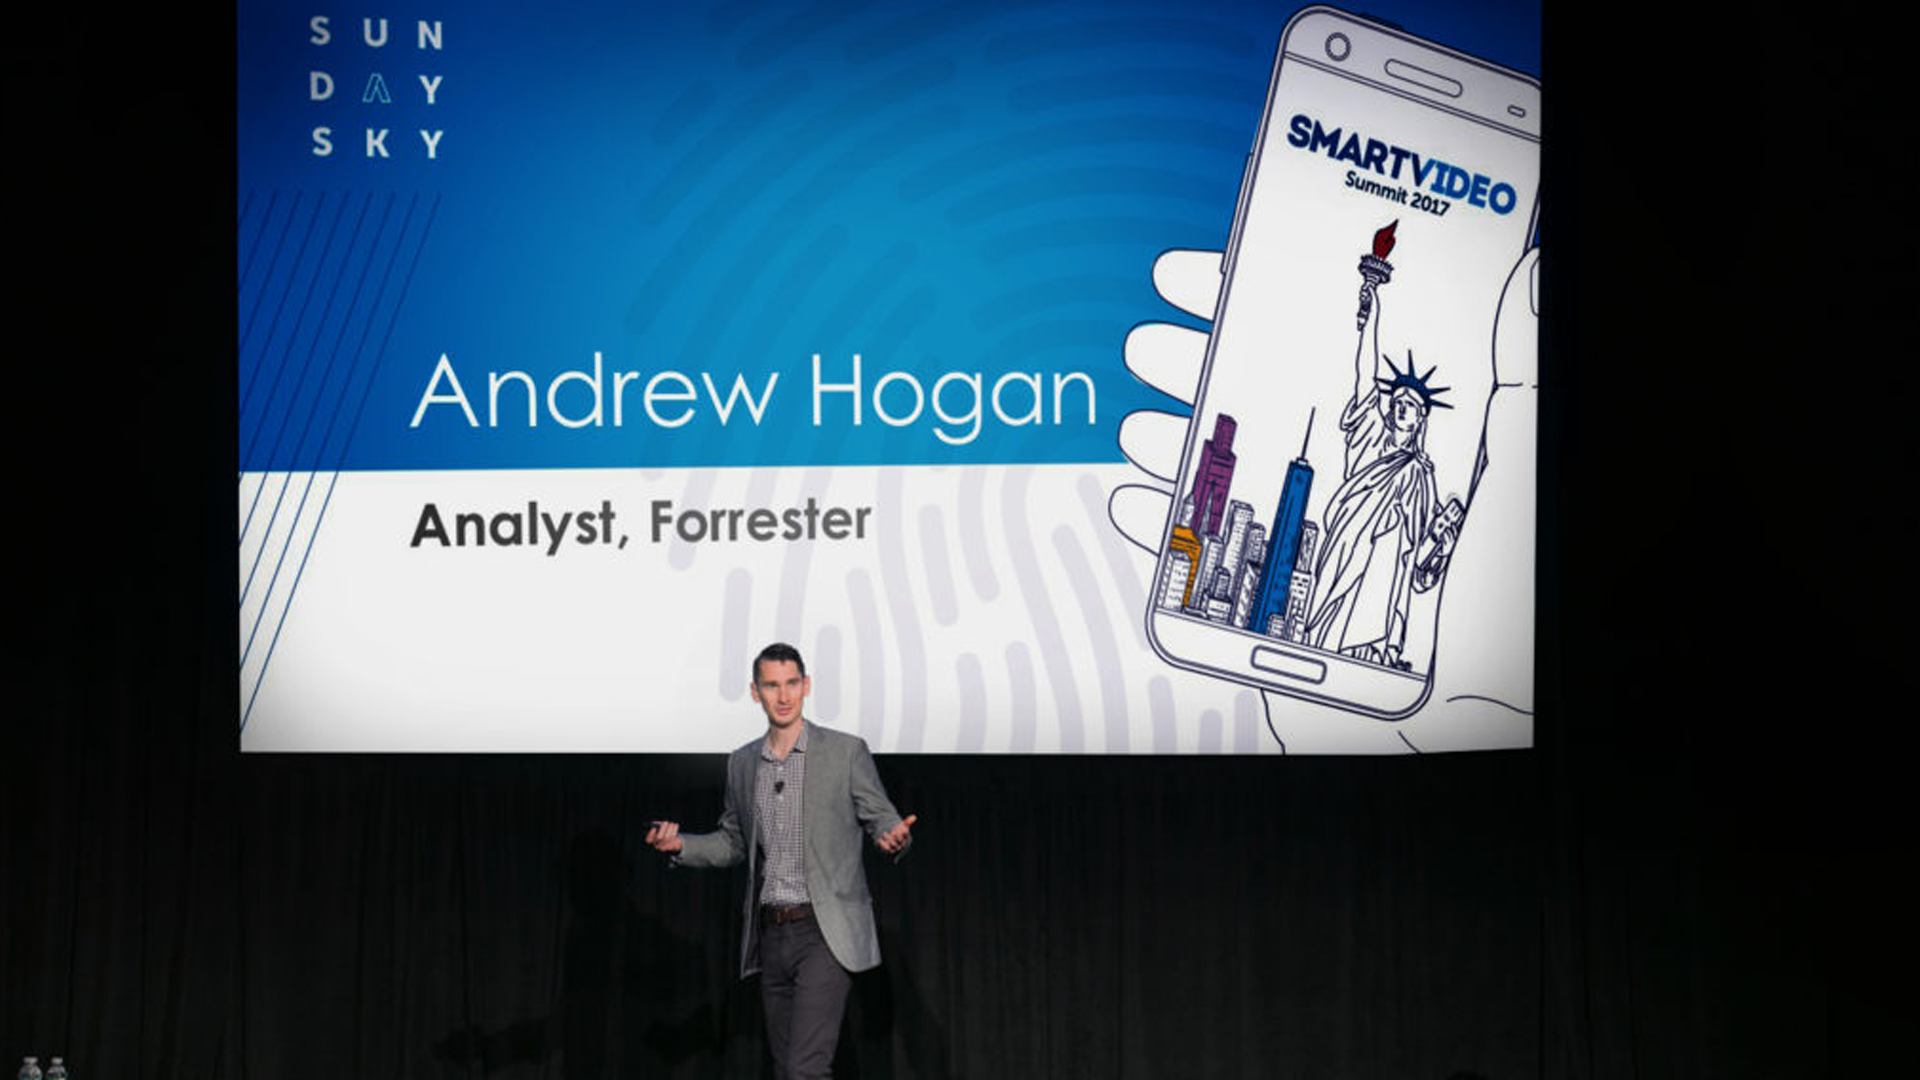 Go Person-First to Enhance Customer Experience: 3 SundaySky Takeaways From Andrew Hogan